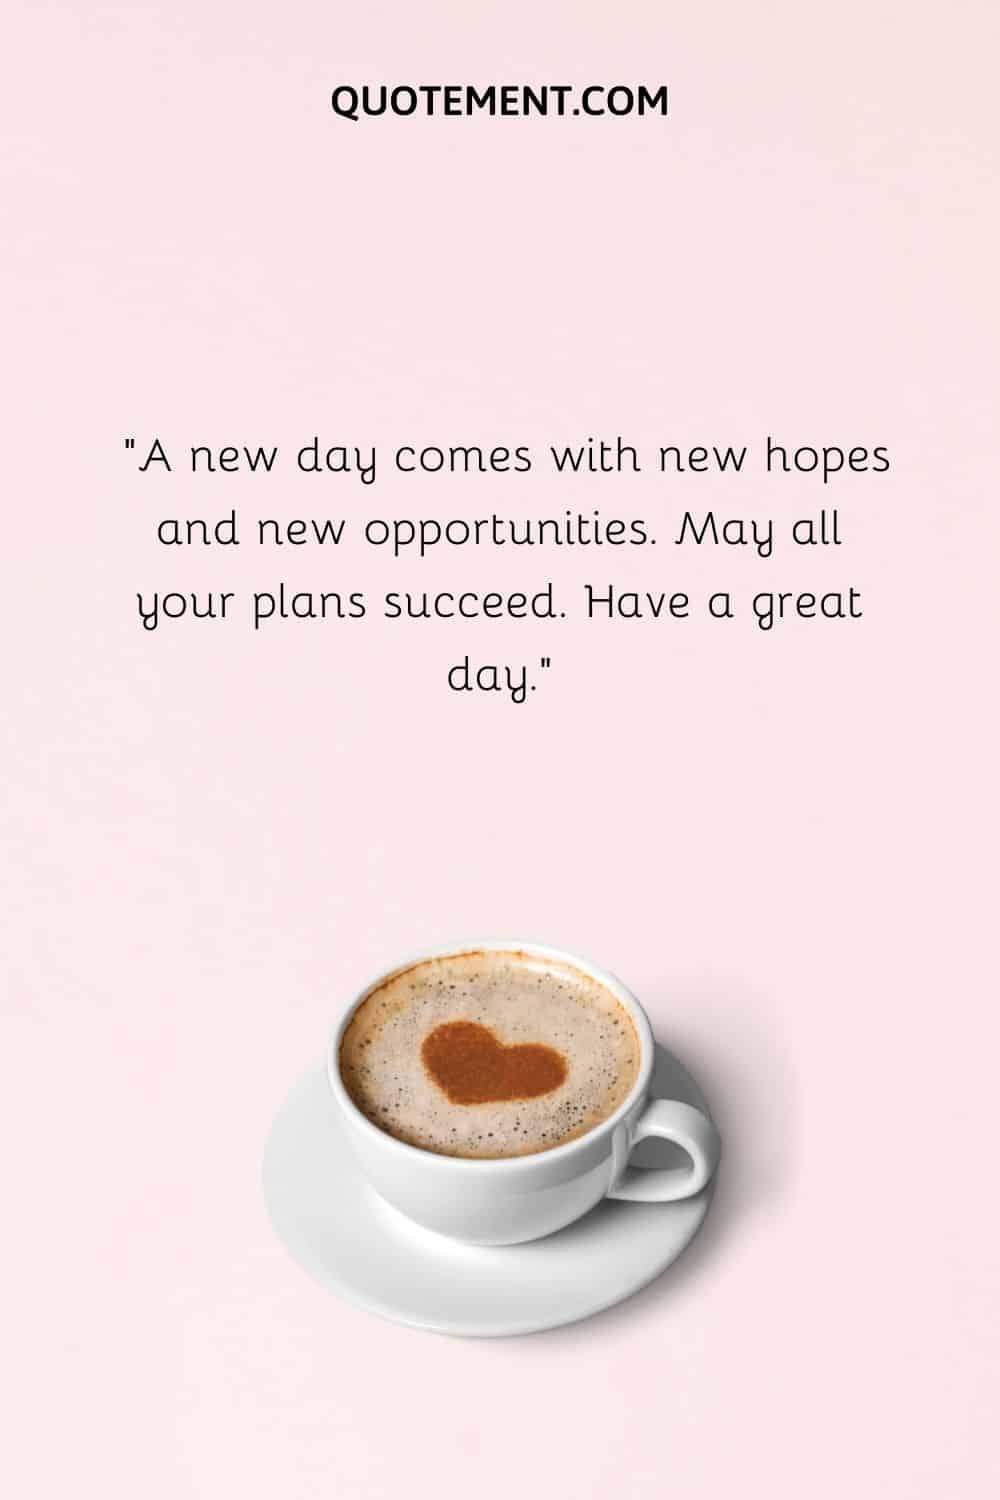 A new day comes with new hopes and new opportunities